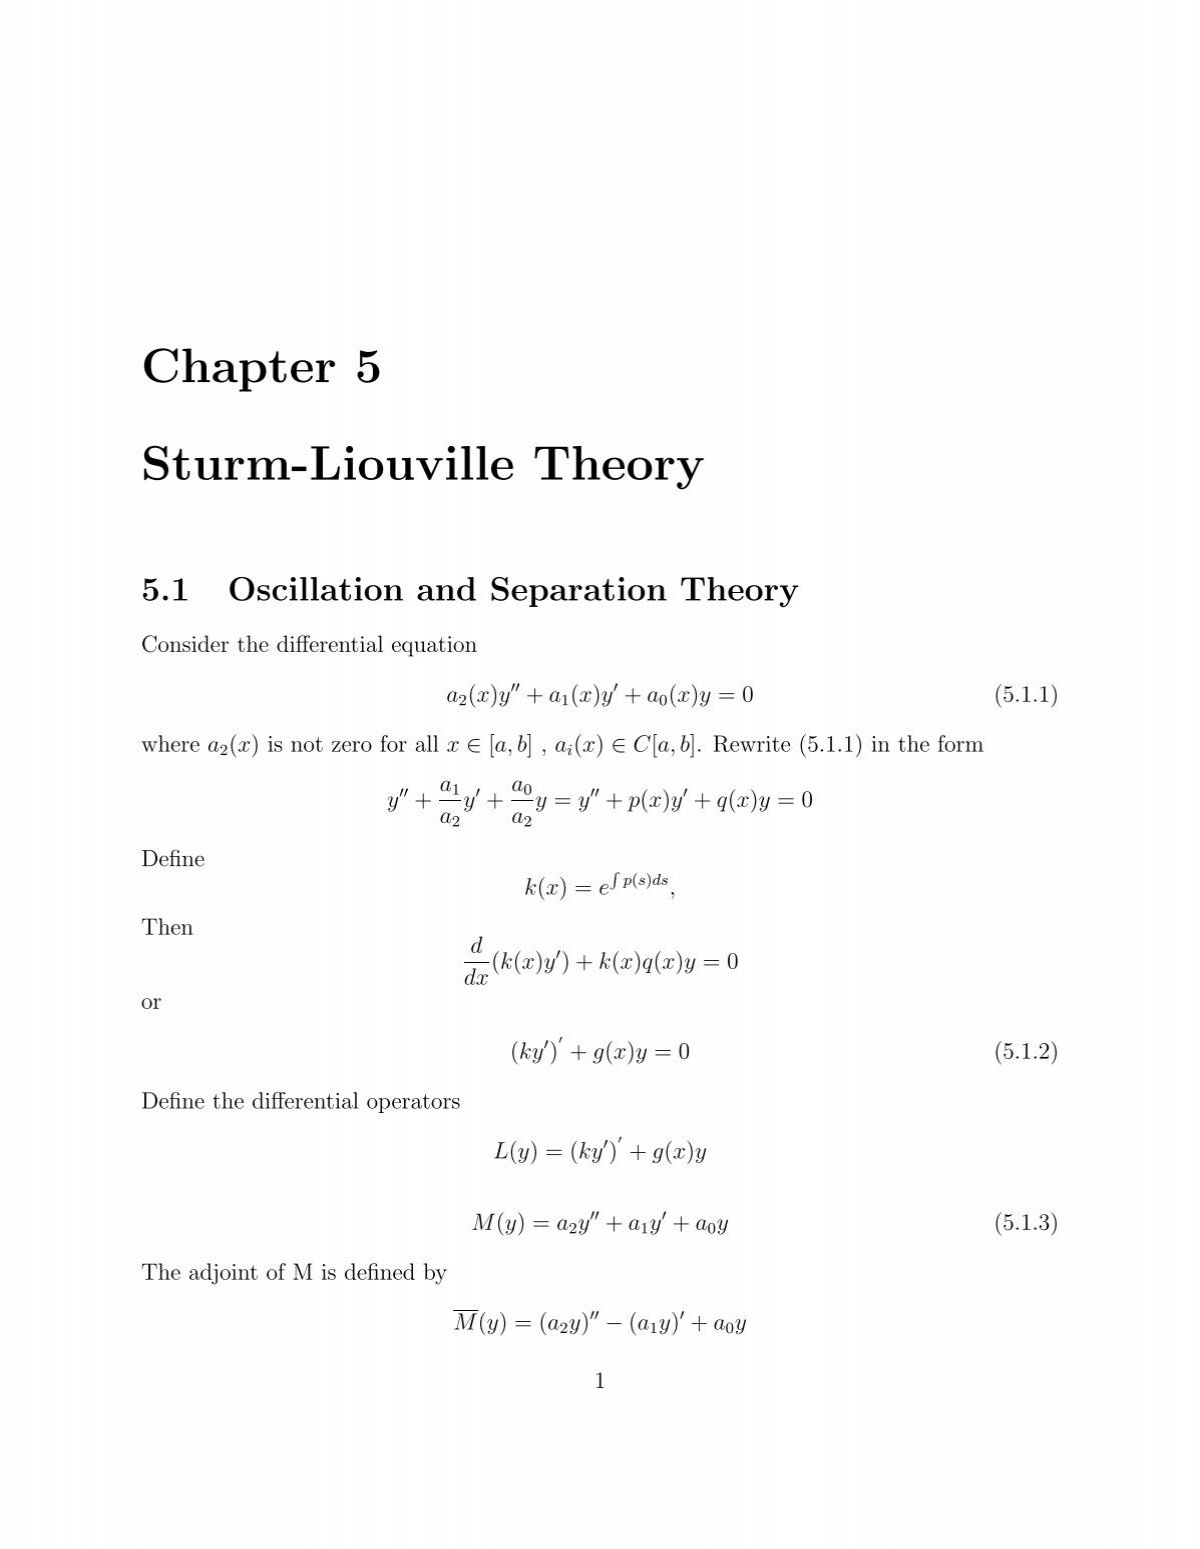 Ode Chapter 5 Sturm Liouville Theory